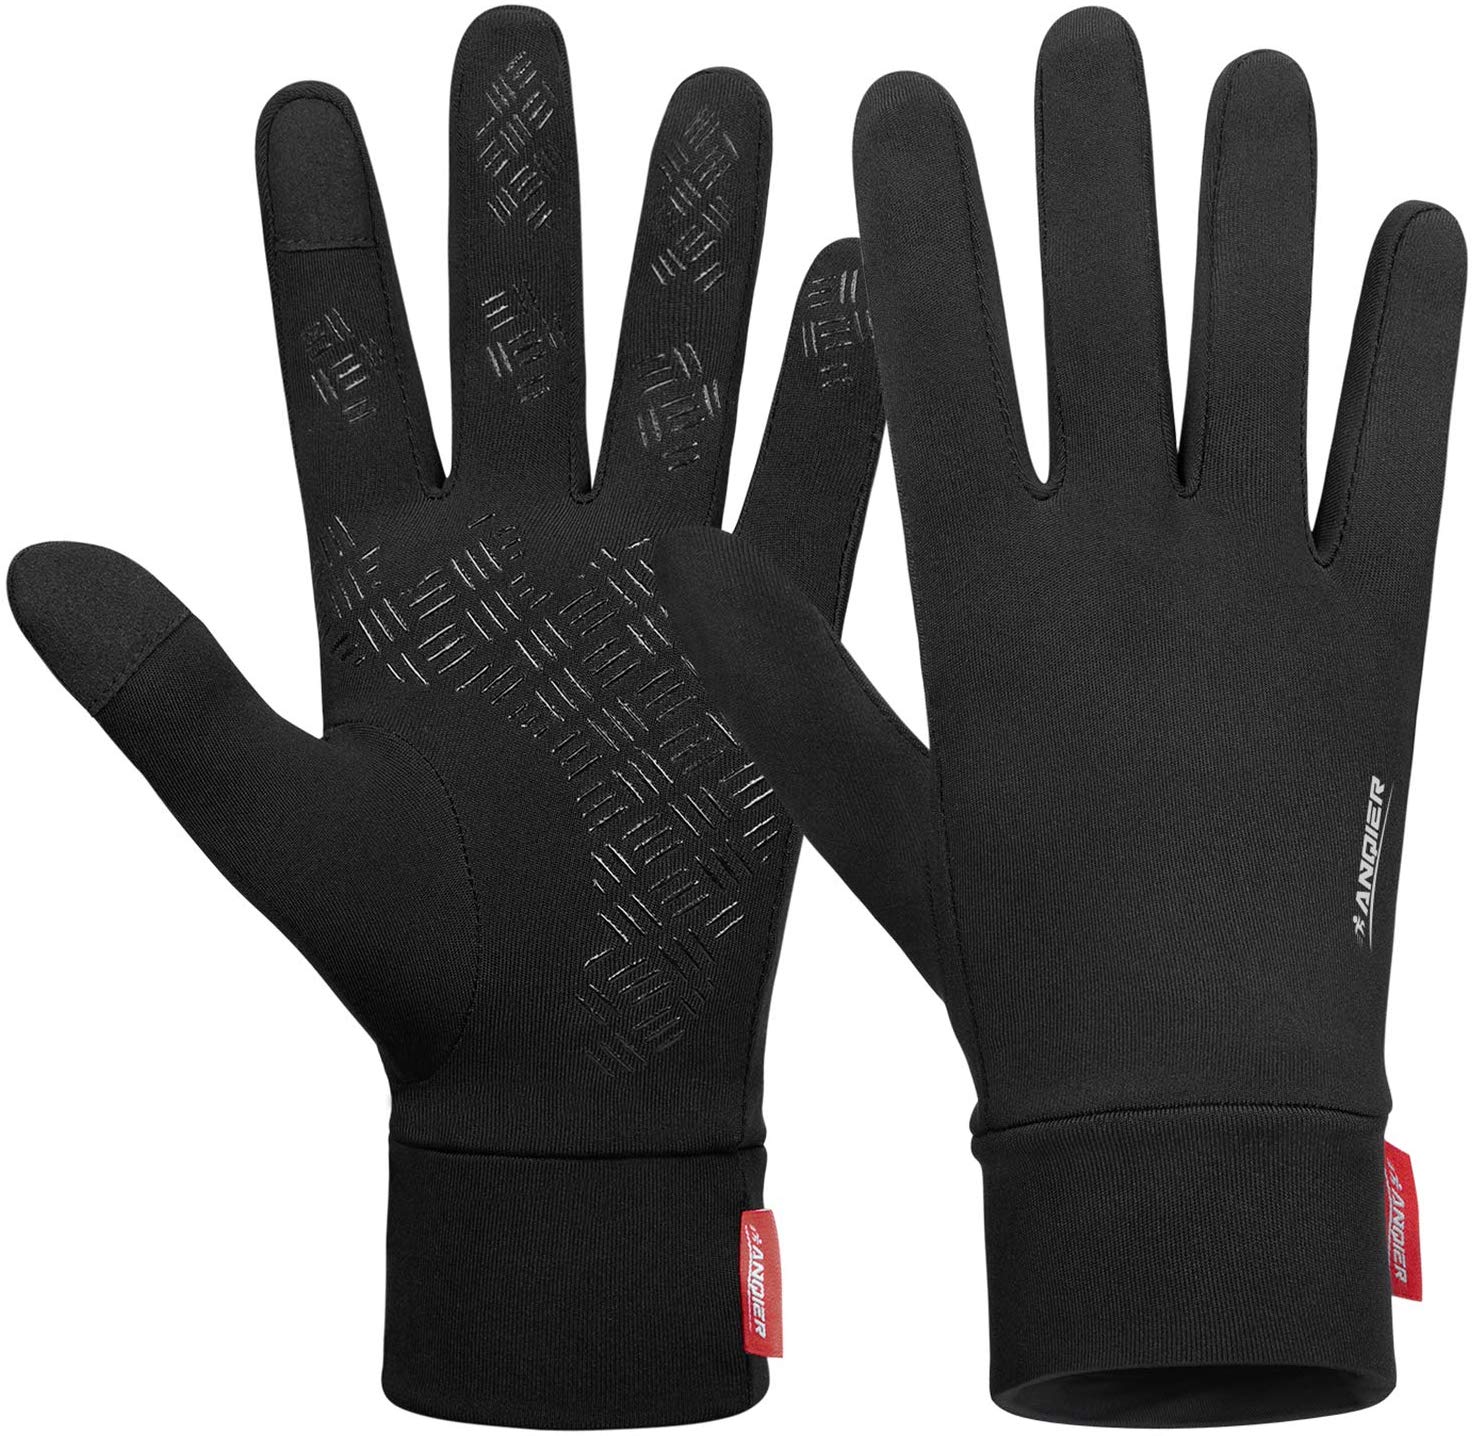 Lanyi Compression Running Sports Cycling Gloves for Men